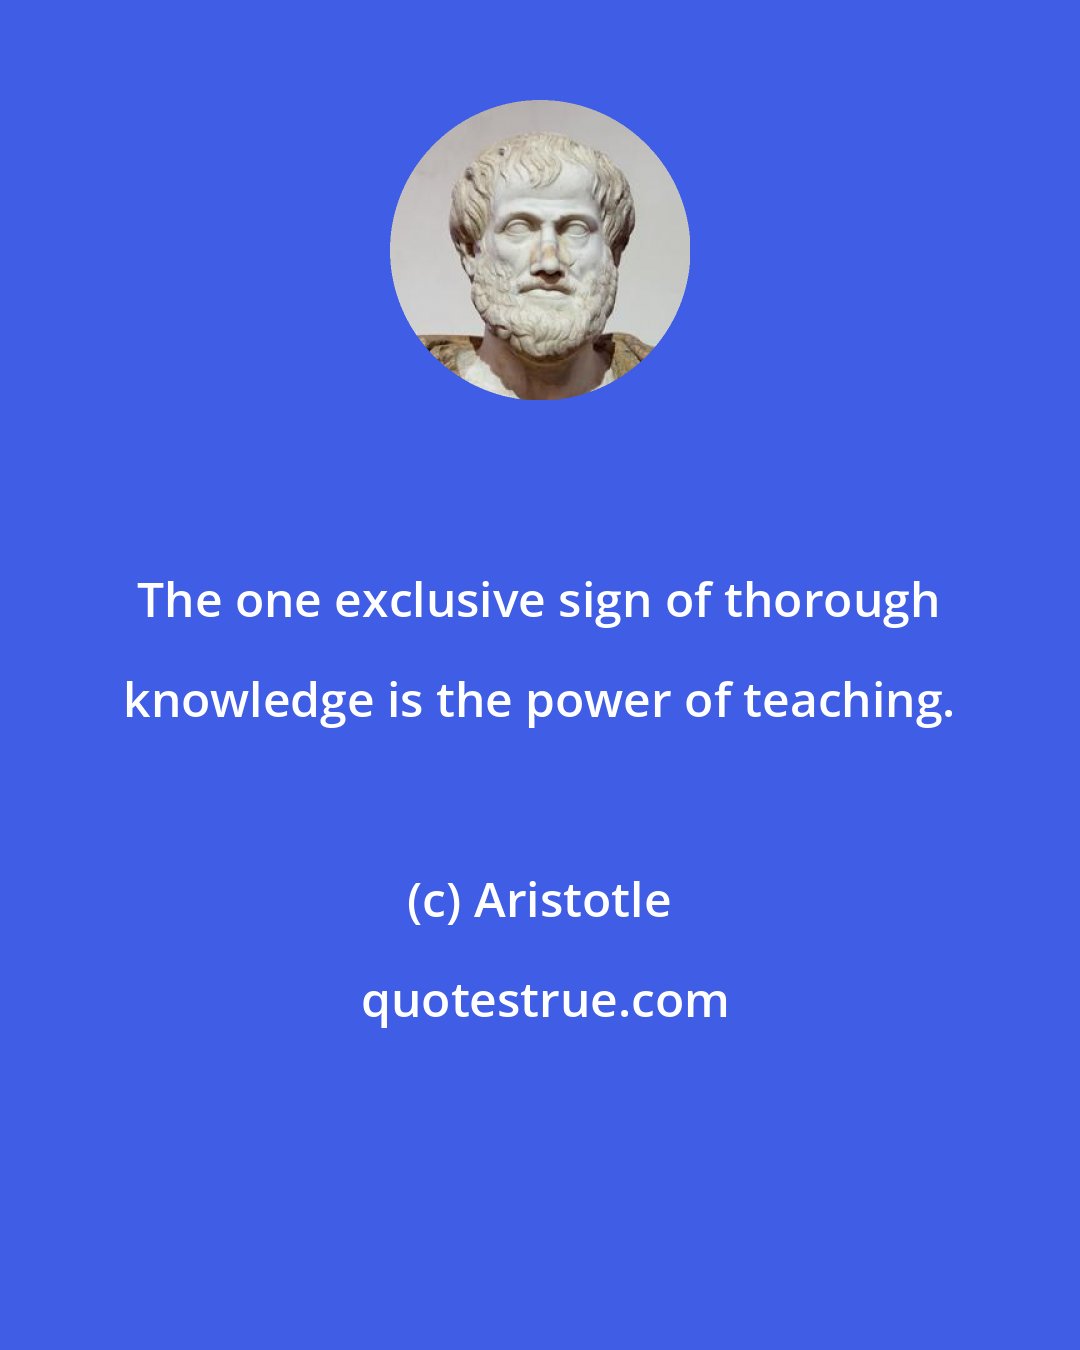 Aristotle: The one exclusive sign of thorough knowledge is the power of teaching.